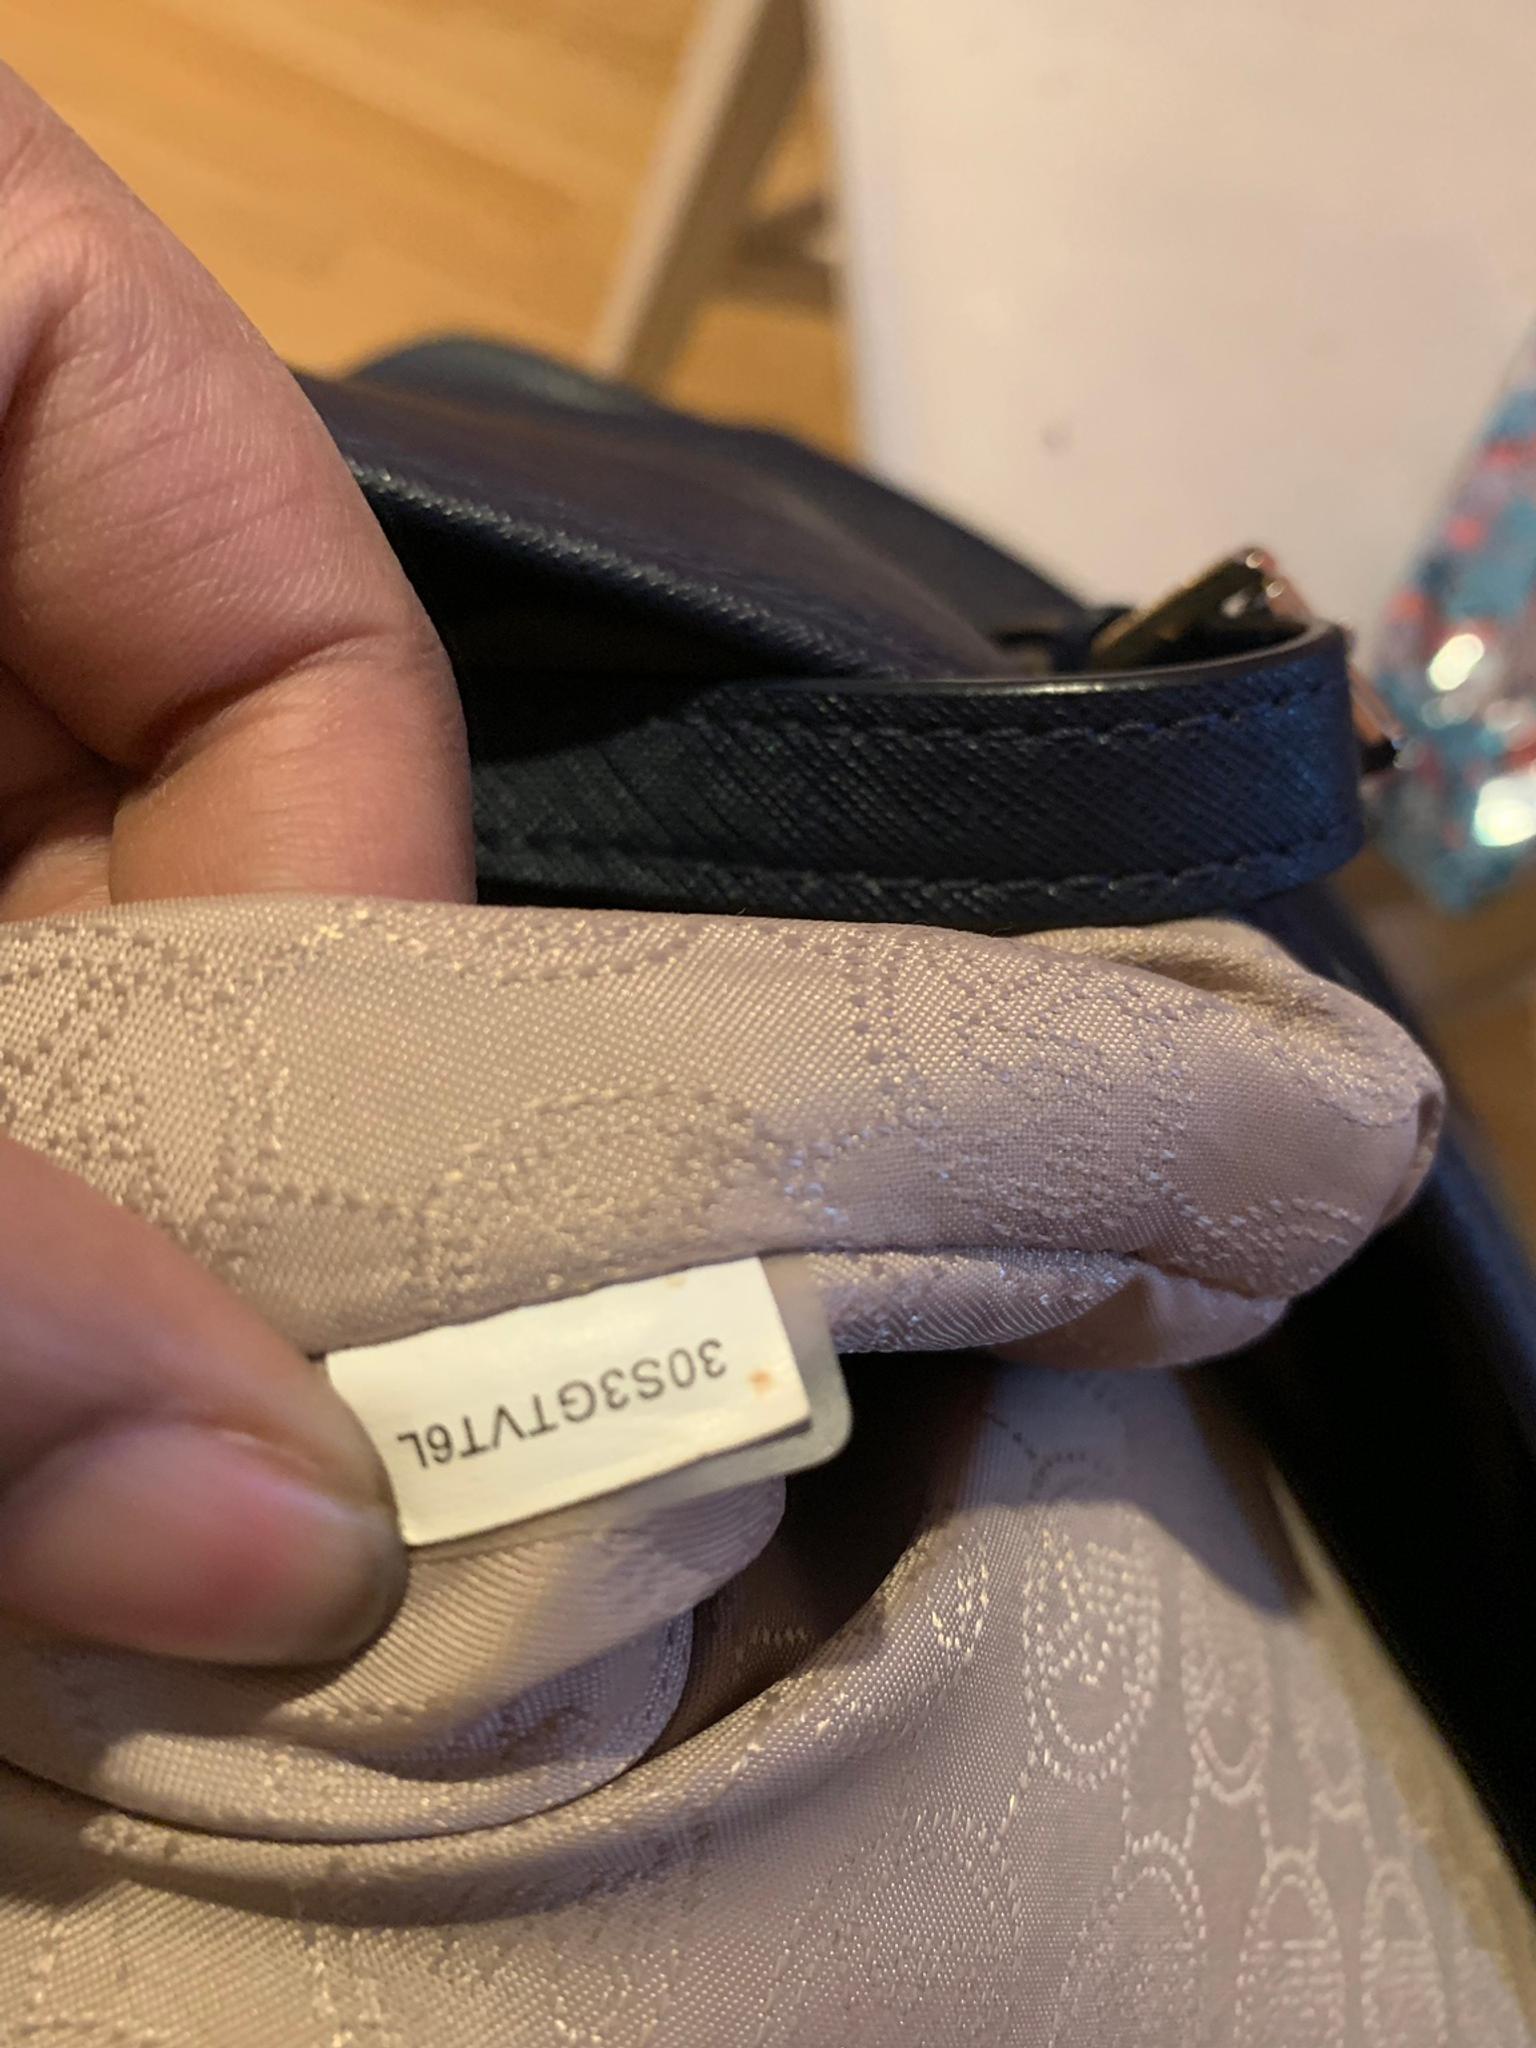 do all mk bags have serial numbers